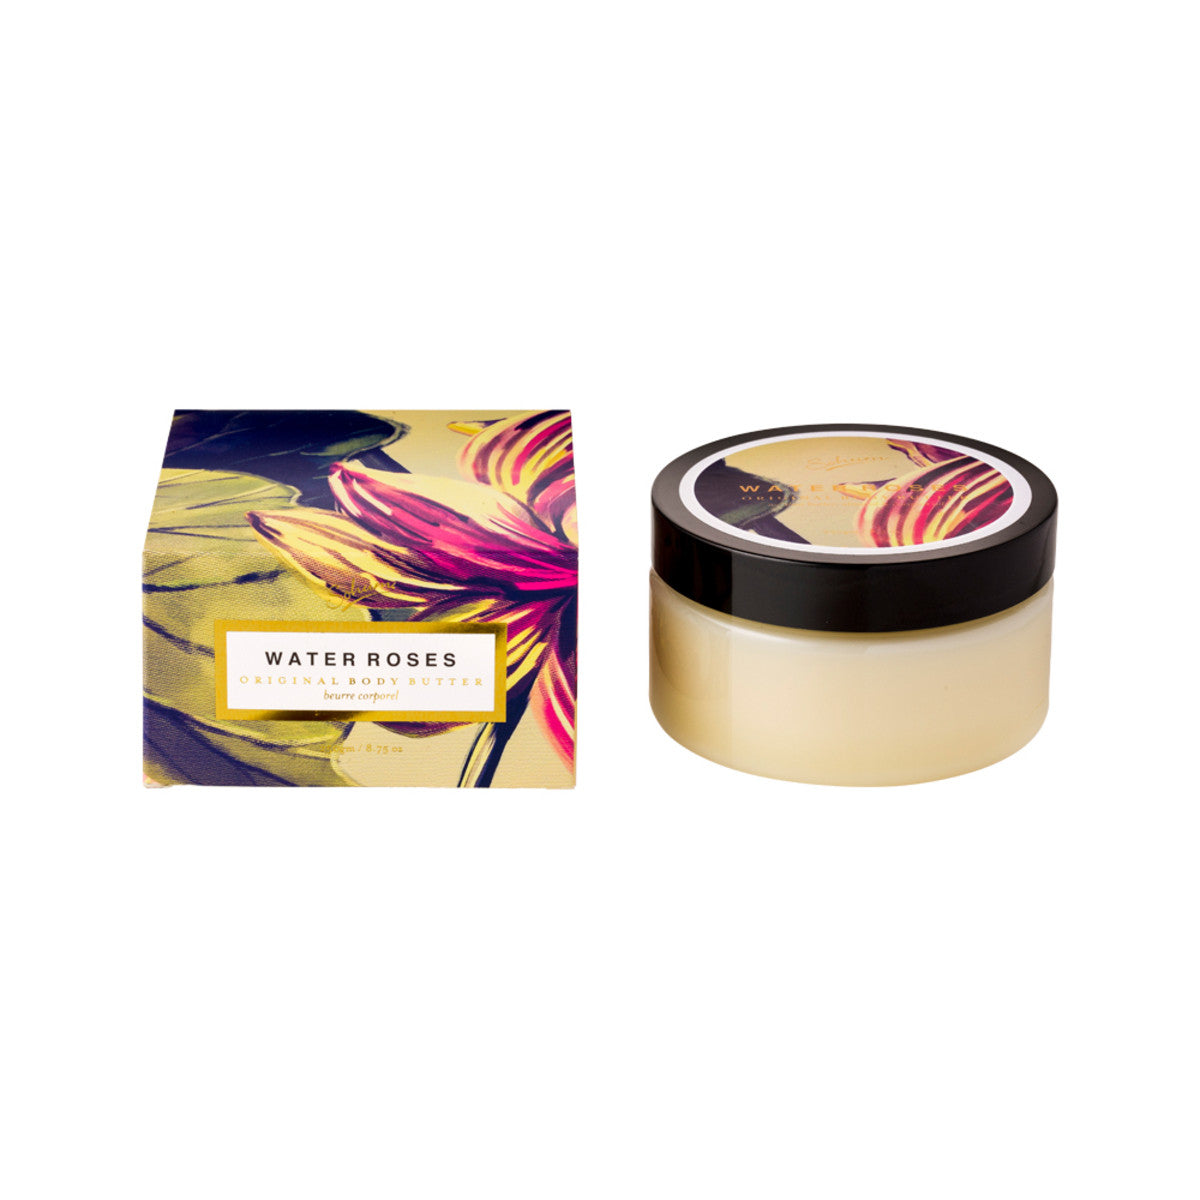 Sohum Tropicale Body Butter Water Roses 250g